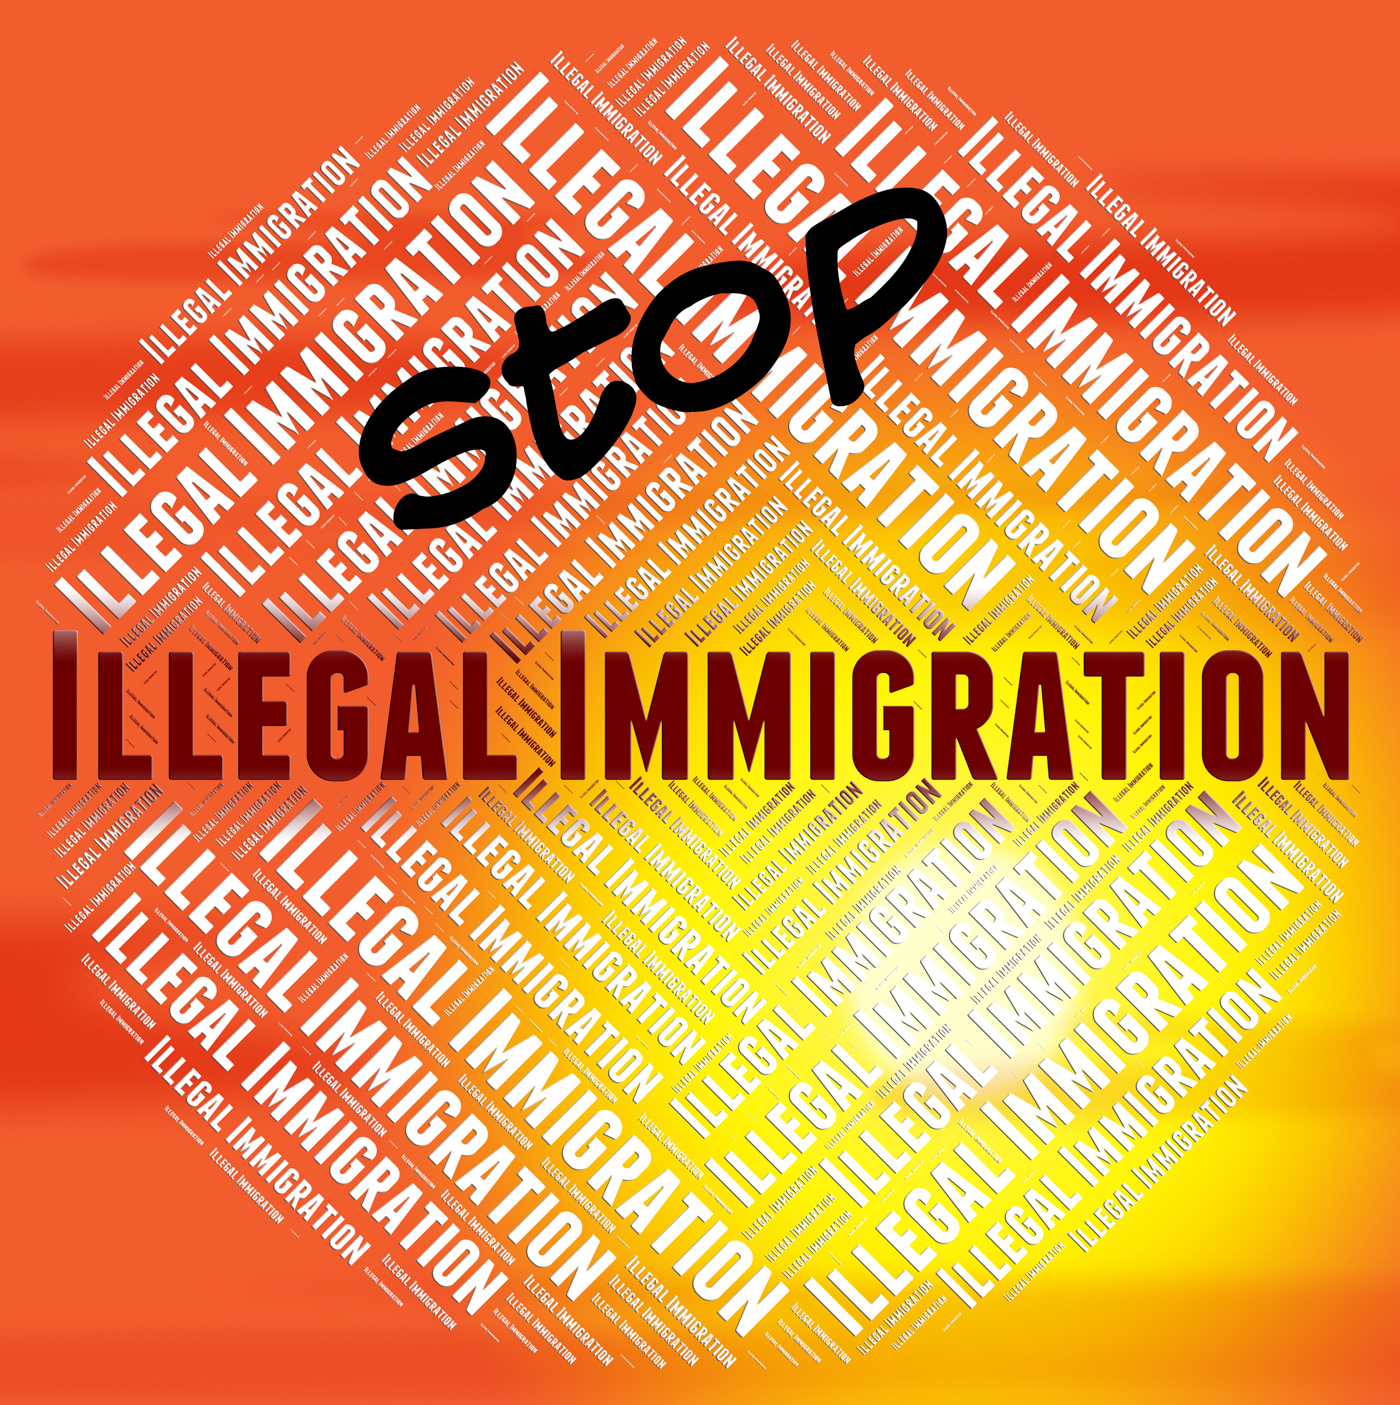 Stop illegal immigration means against the law and banned photo